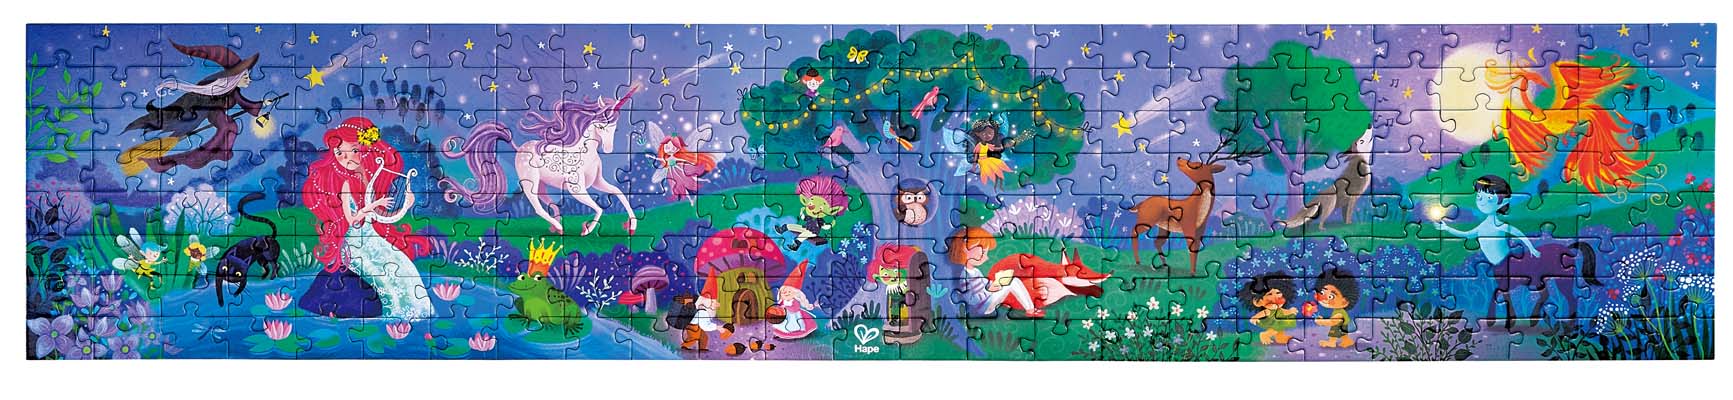 Hape 200pc Magic Forest Puzzle Glowing 1.5m